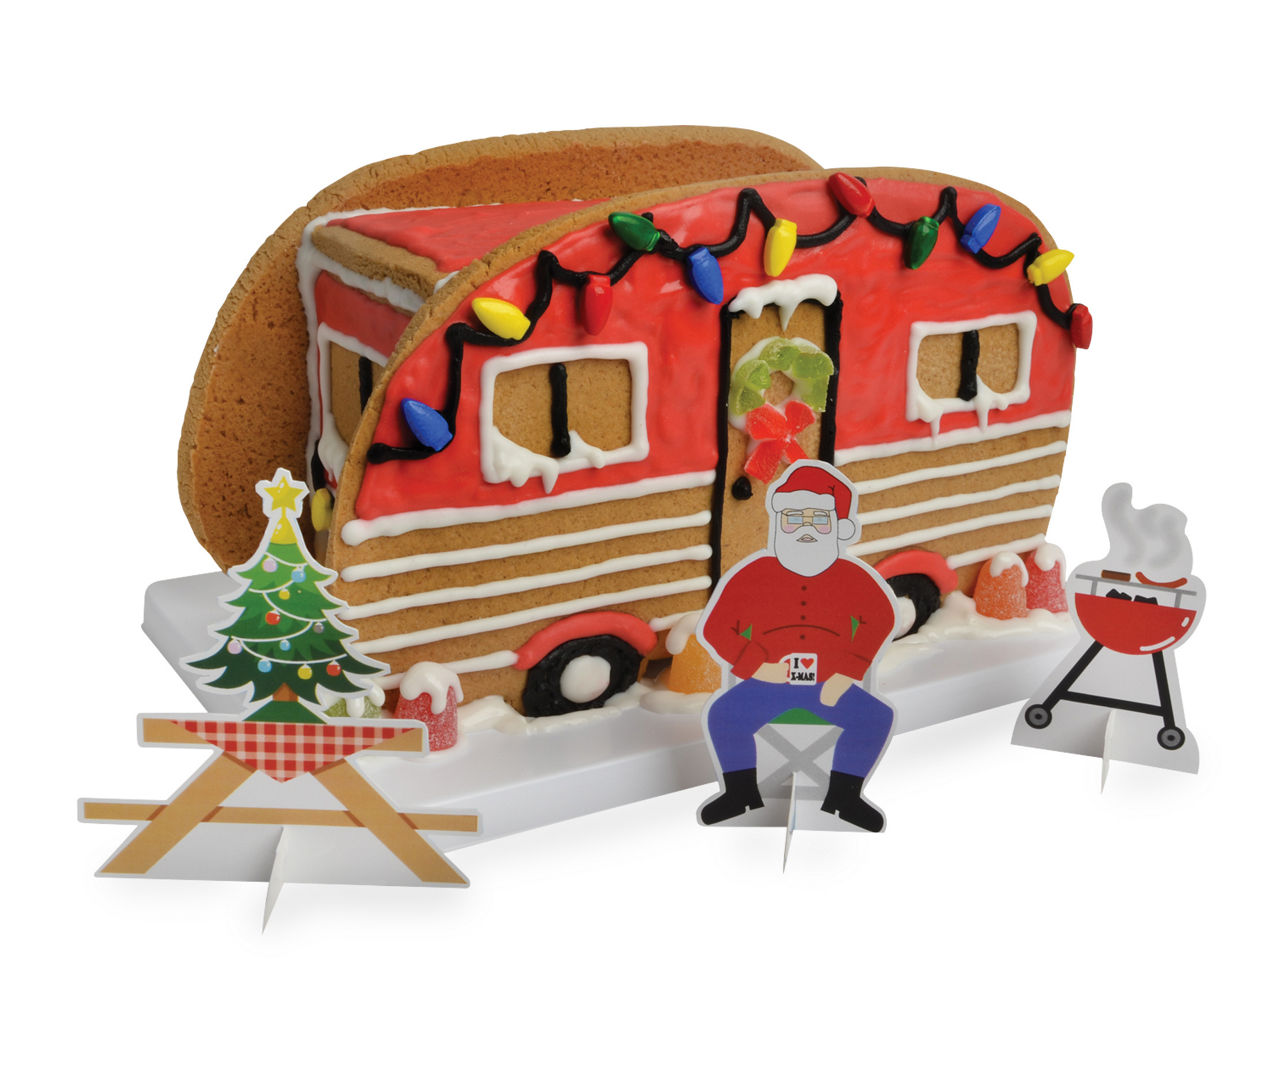 Pier 1 Imports Holiday Christmas Camper RV Cookie Jar Kitchen